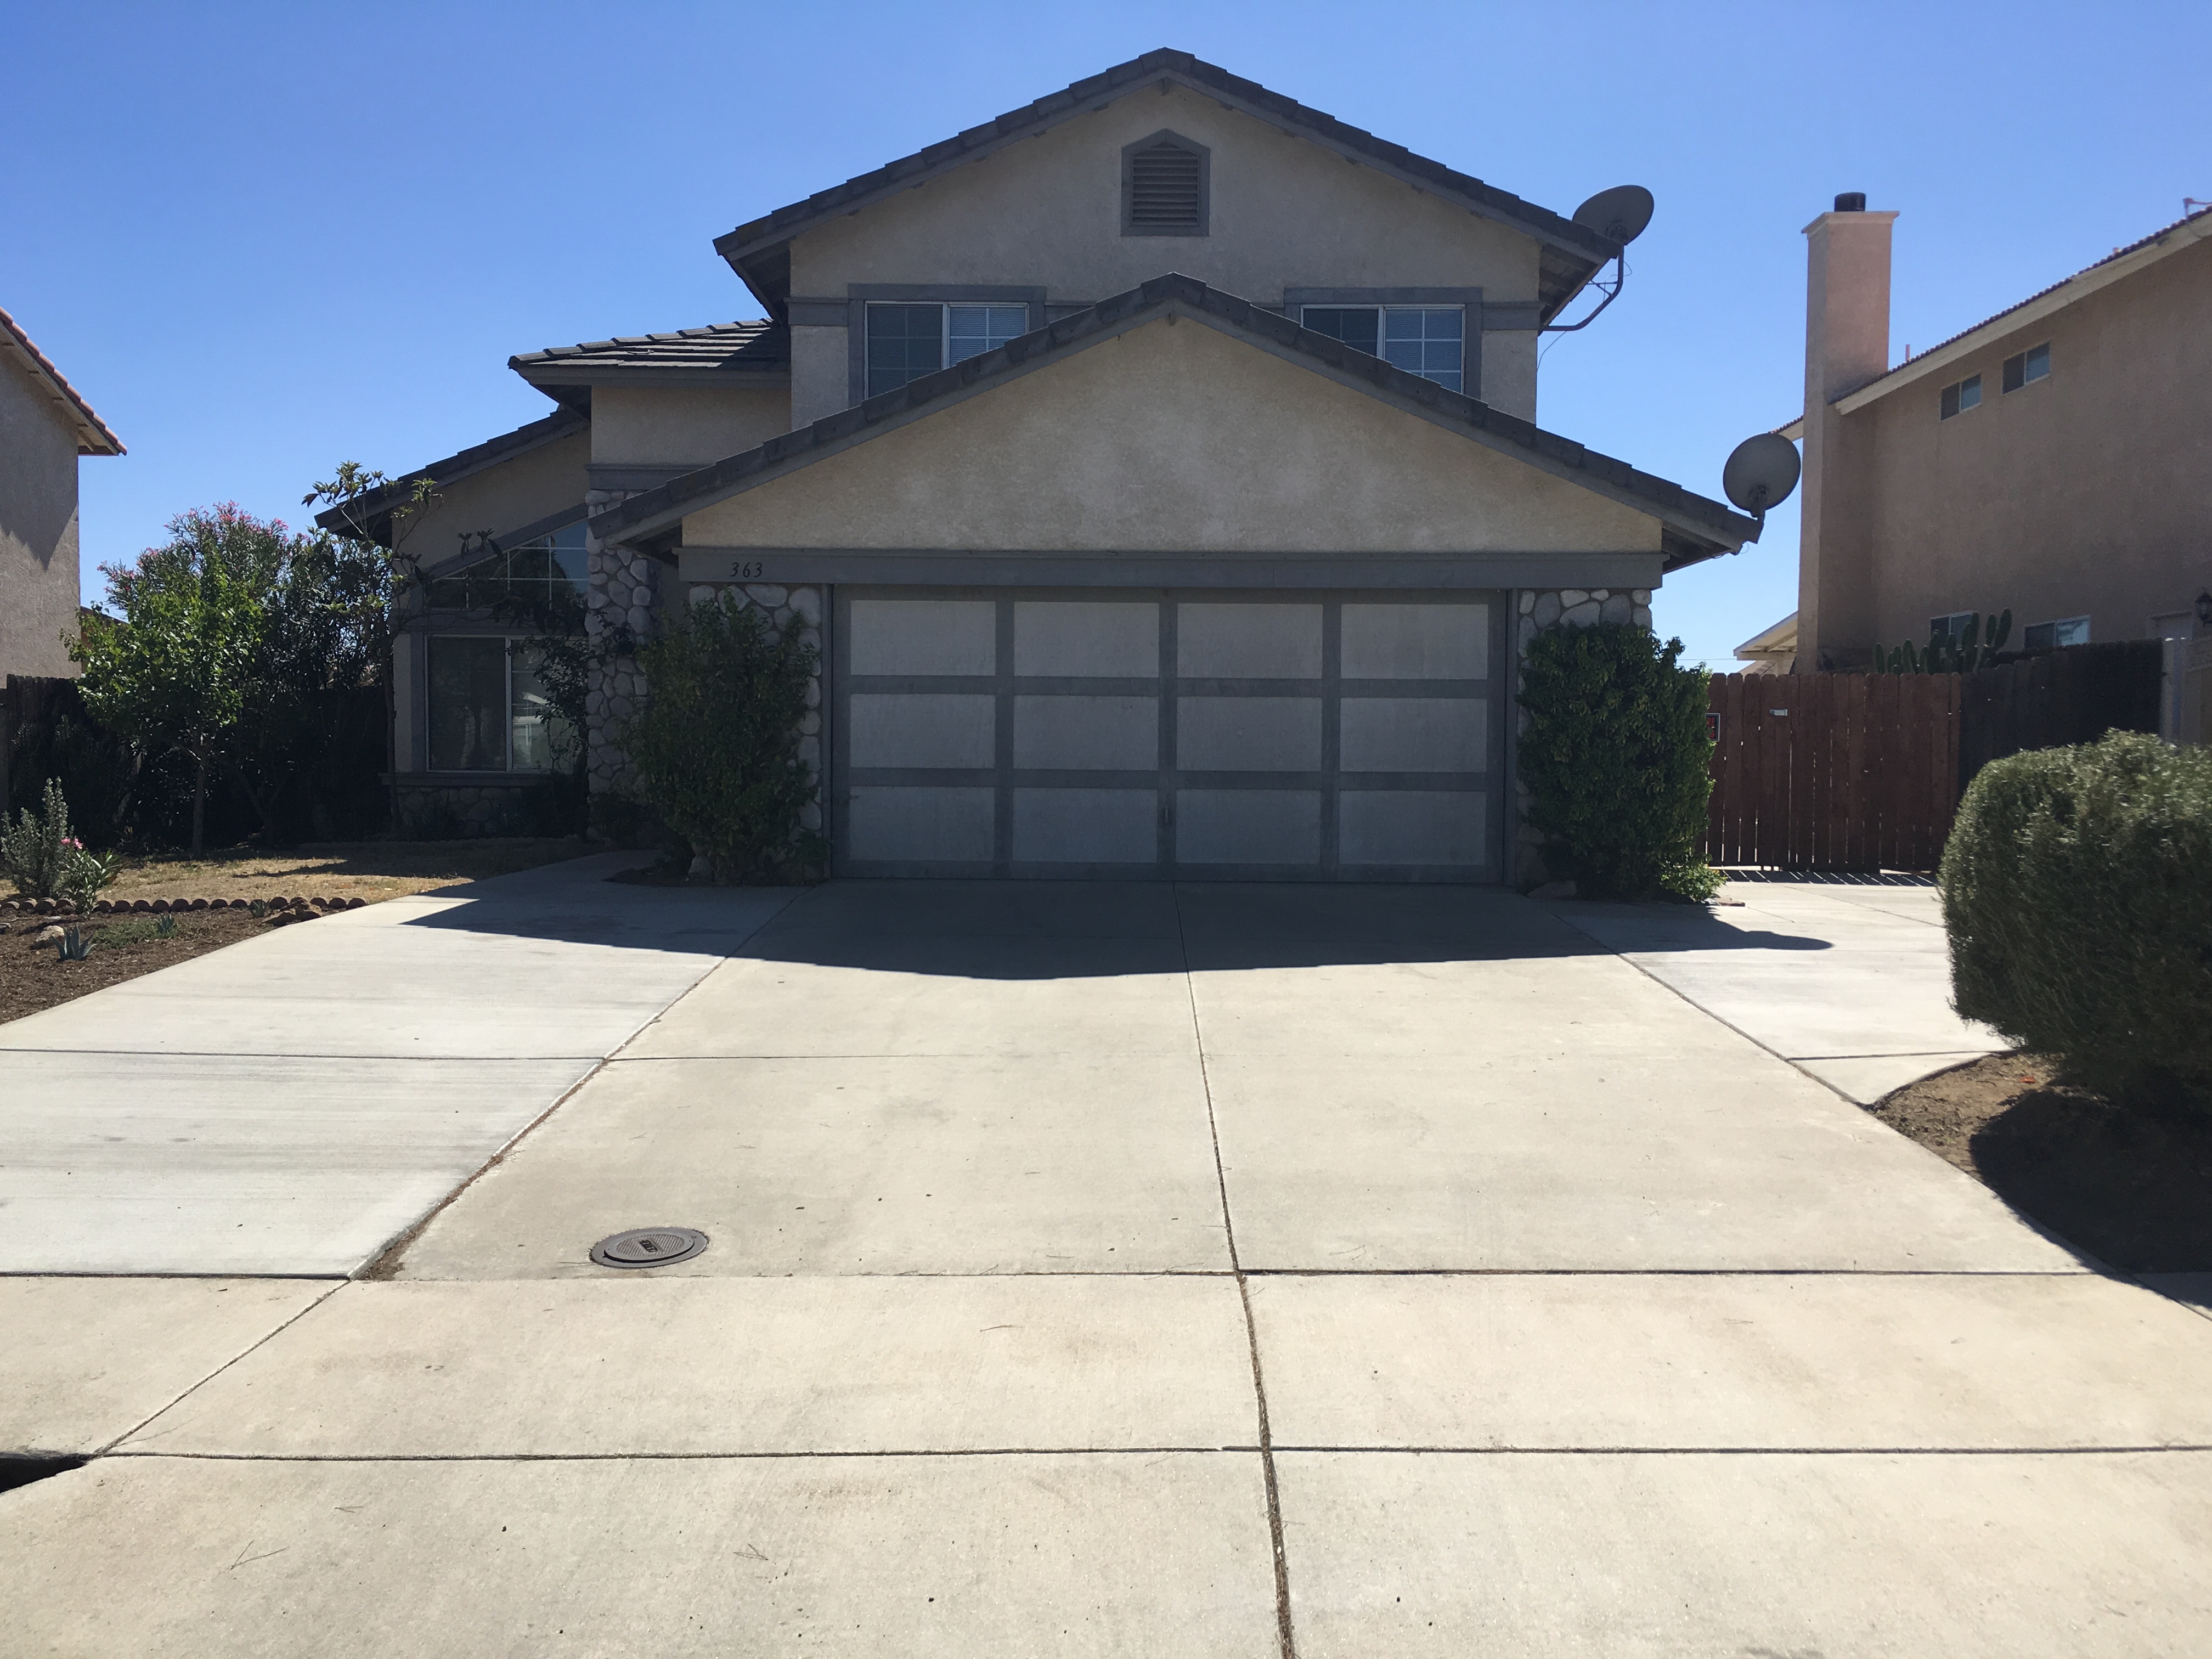 Just SOLD in Perris CA.  Call Real Estate Agent Denise Gentile with Coldwell Banker Associated Brokers Realty if you would like the same results! 951-751-1311.